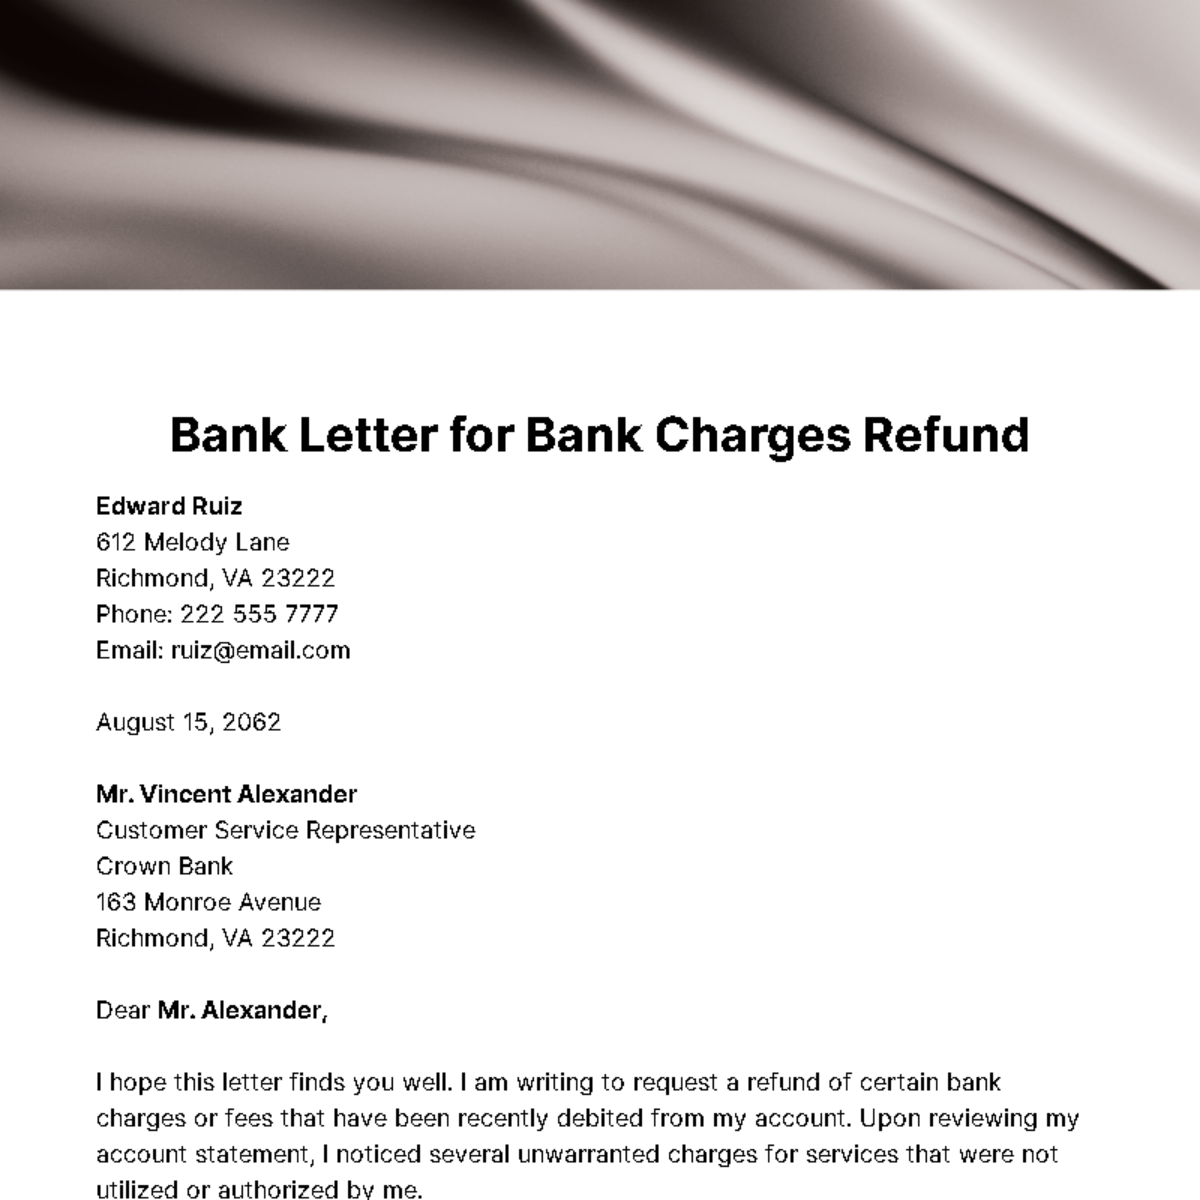 Bank Letter for Bank Charges Refund Template